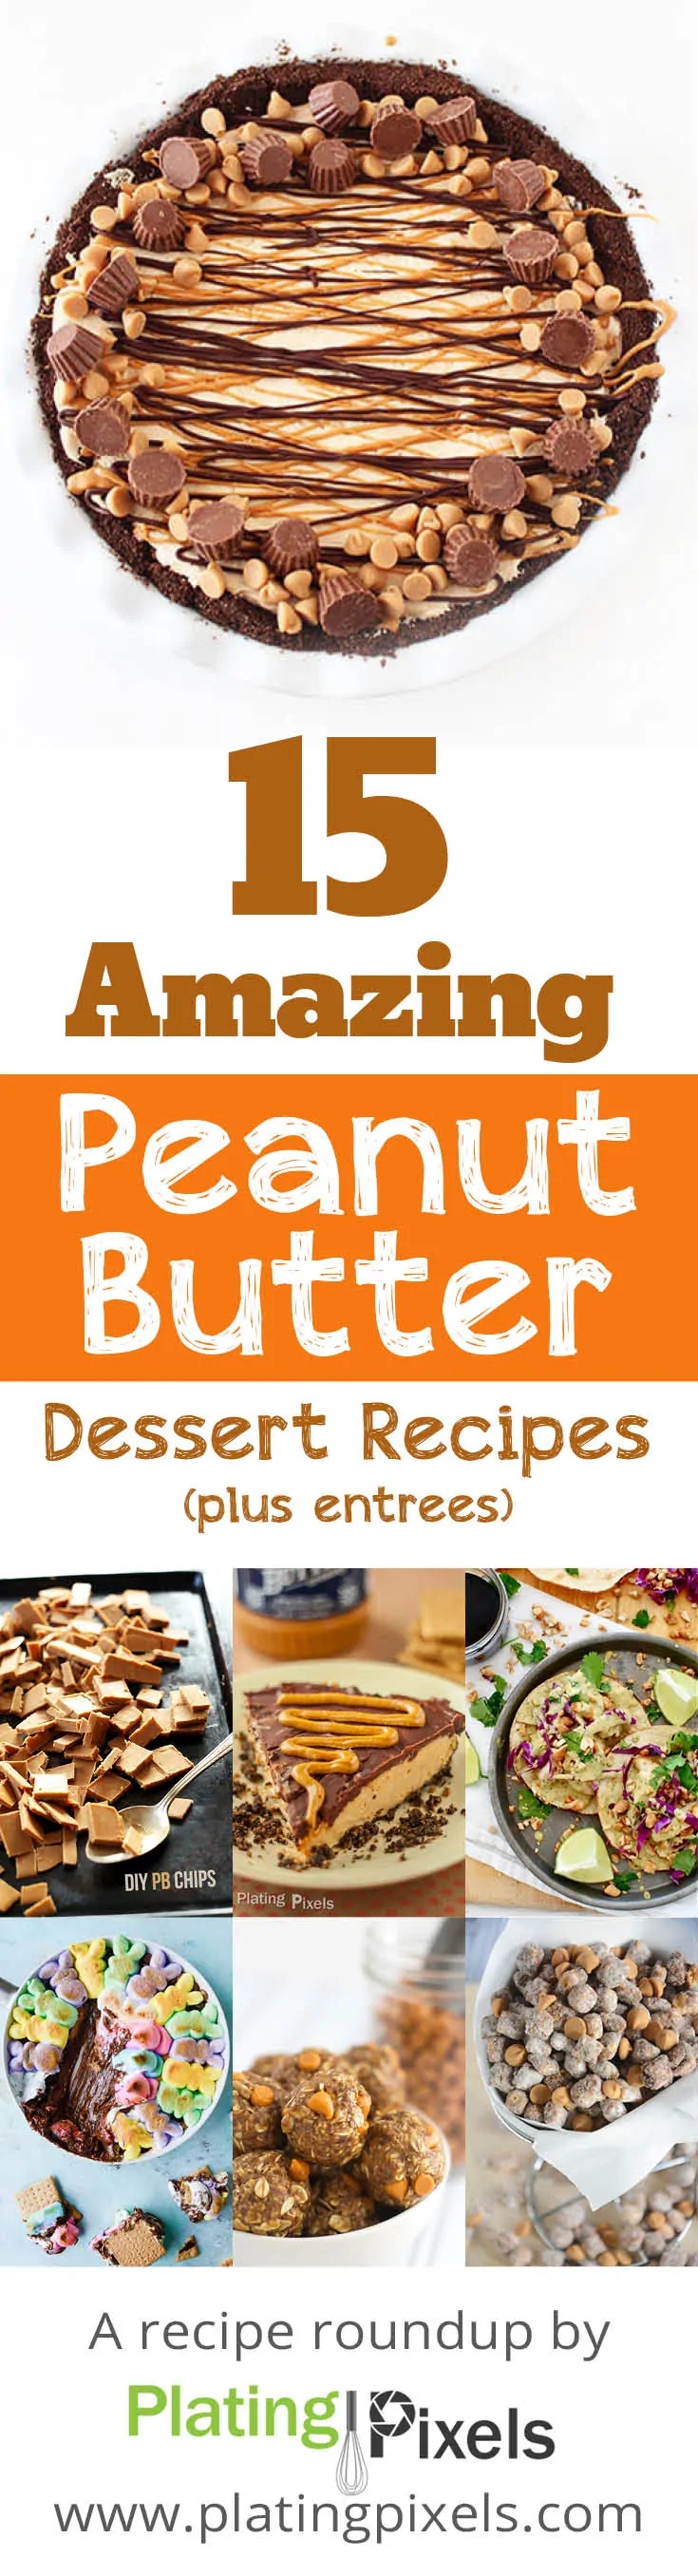 15 Amazing Peanut Butter Dessert and Entree Recipes by www.platingpixels.com